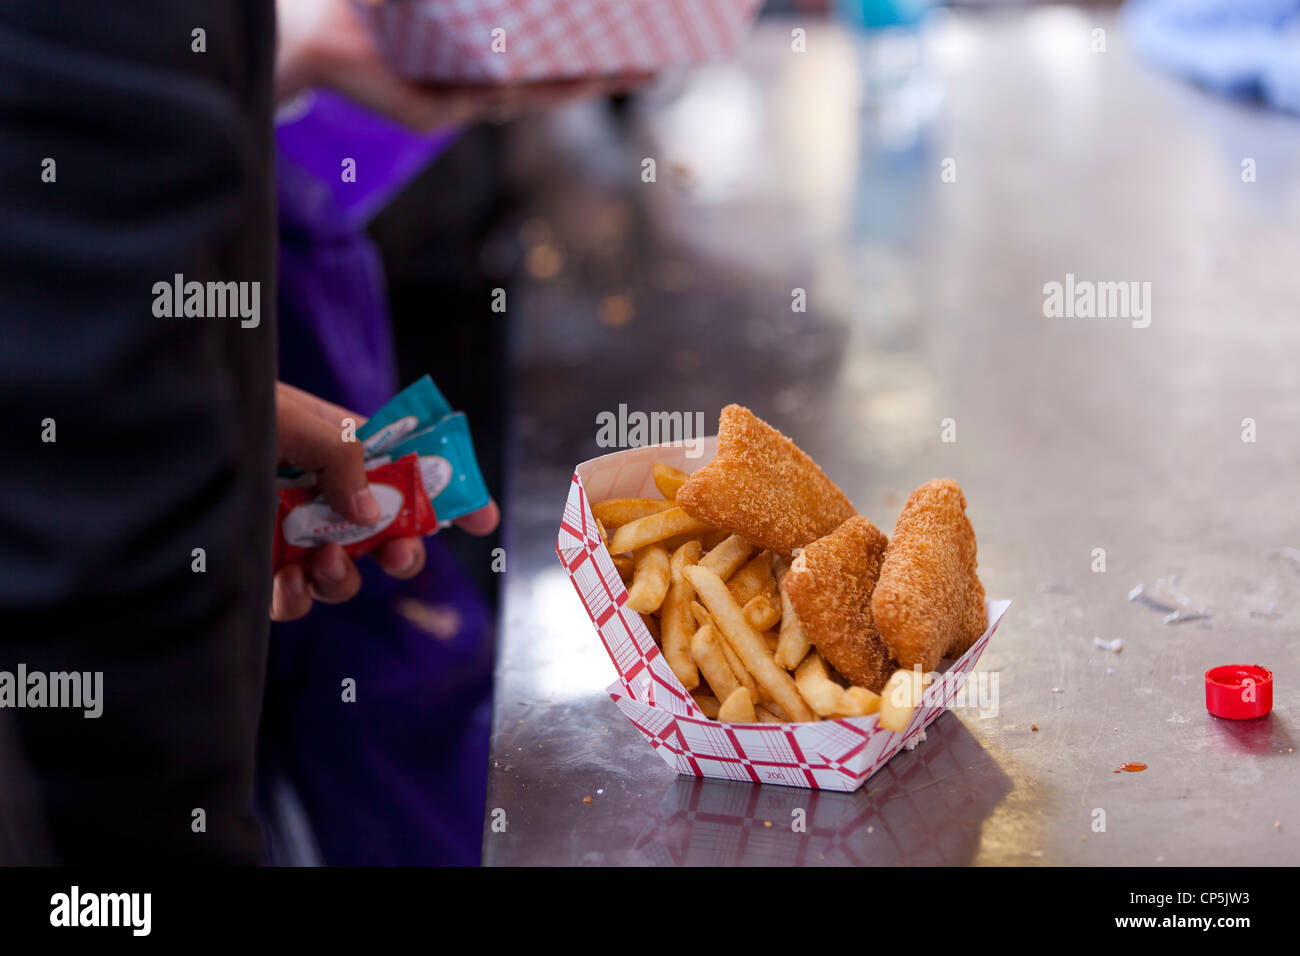 Fish and chips takeaway Stock Photo